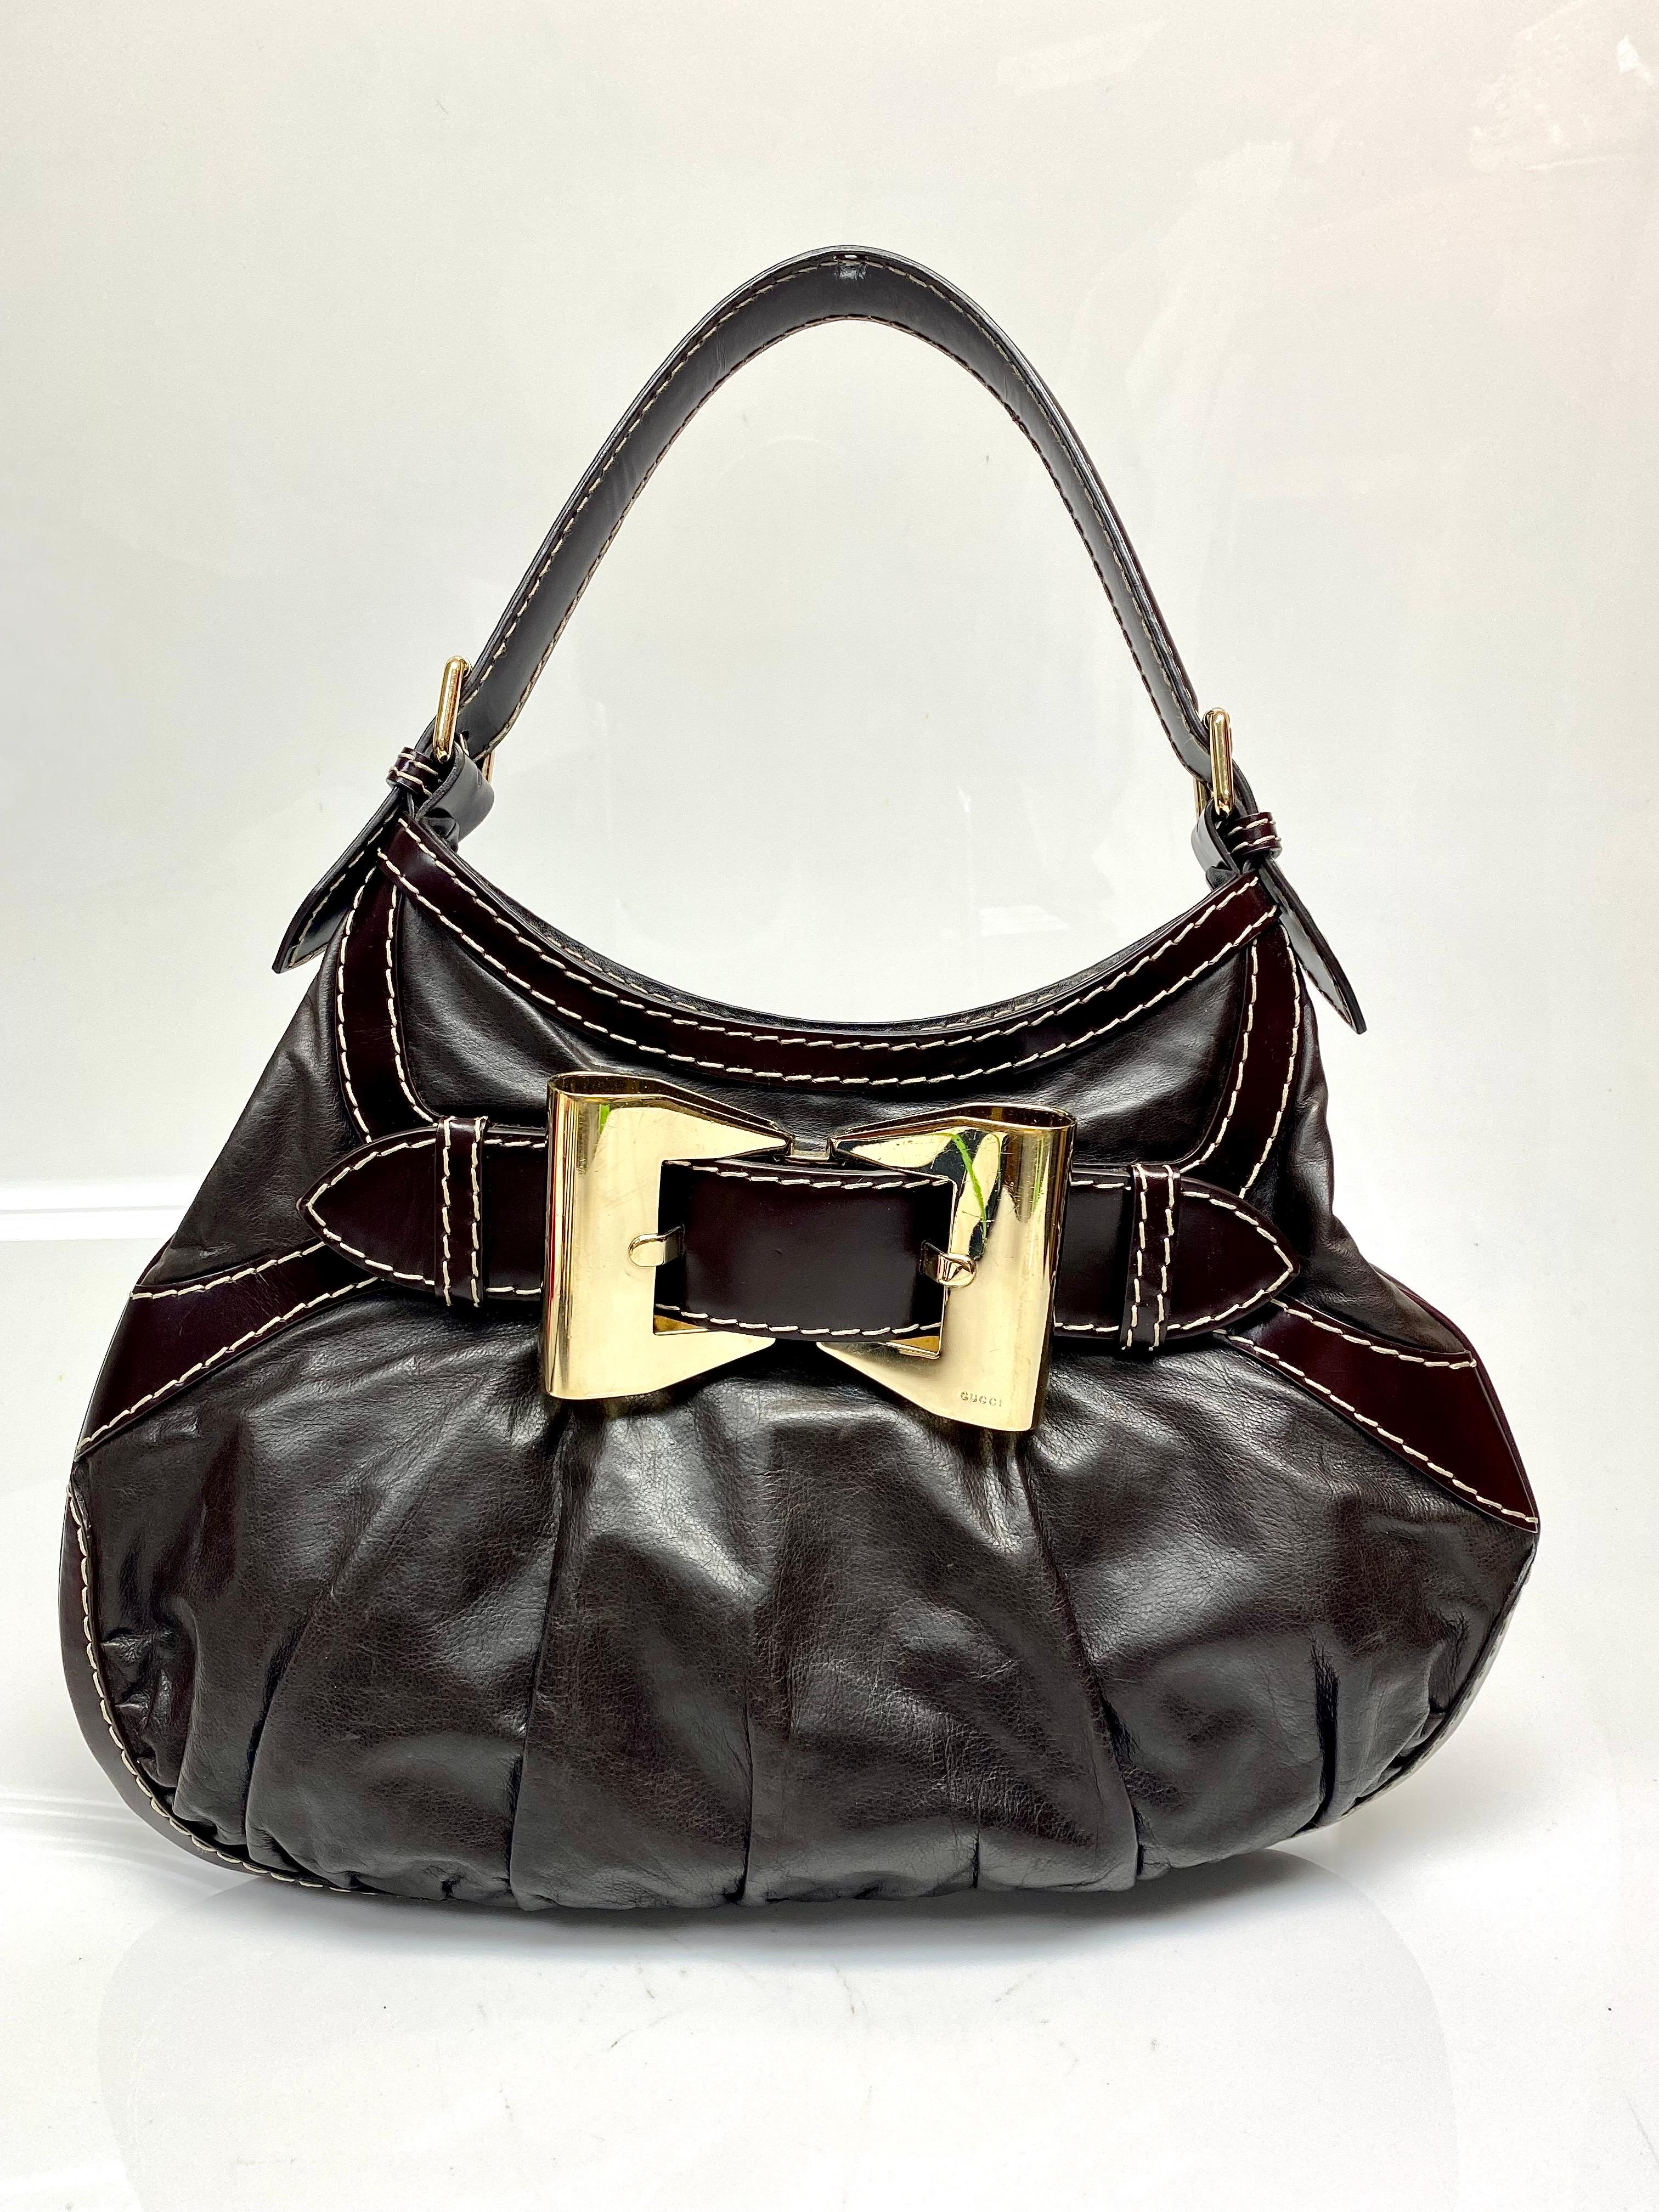 Gucci Brown Leather Gold Hardware Handbag. This beautifully made Gucci handbag is perfect for any season. The bag features a gold hardware bow front, white stitched lining and one interior zipped pocket. Item is in good condition with some scuffs on